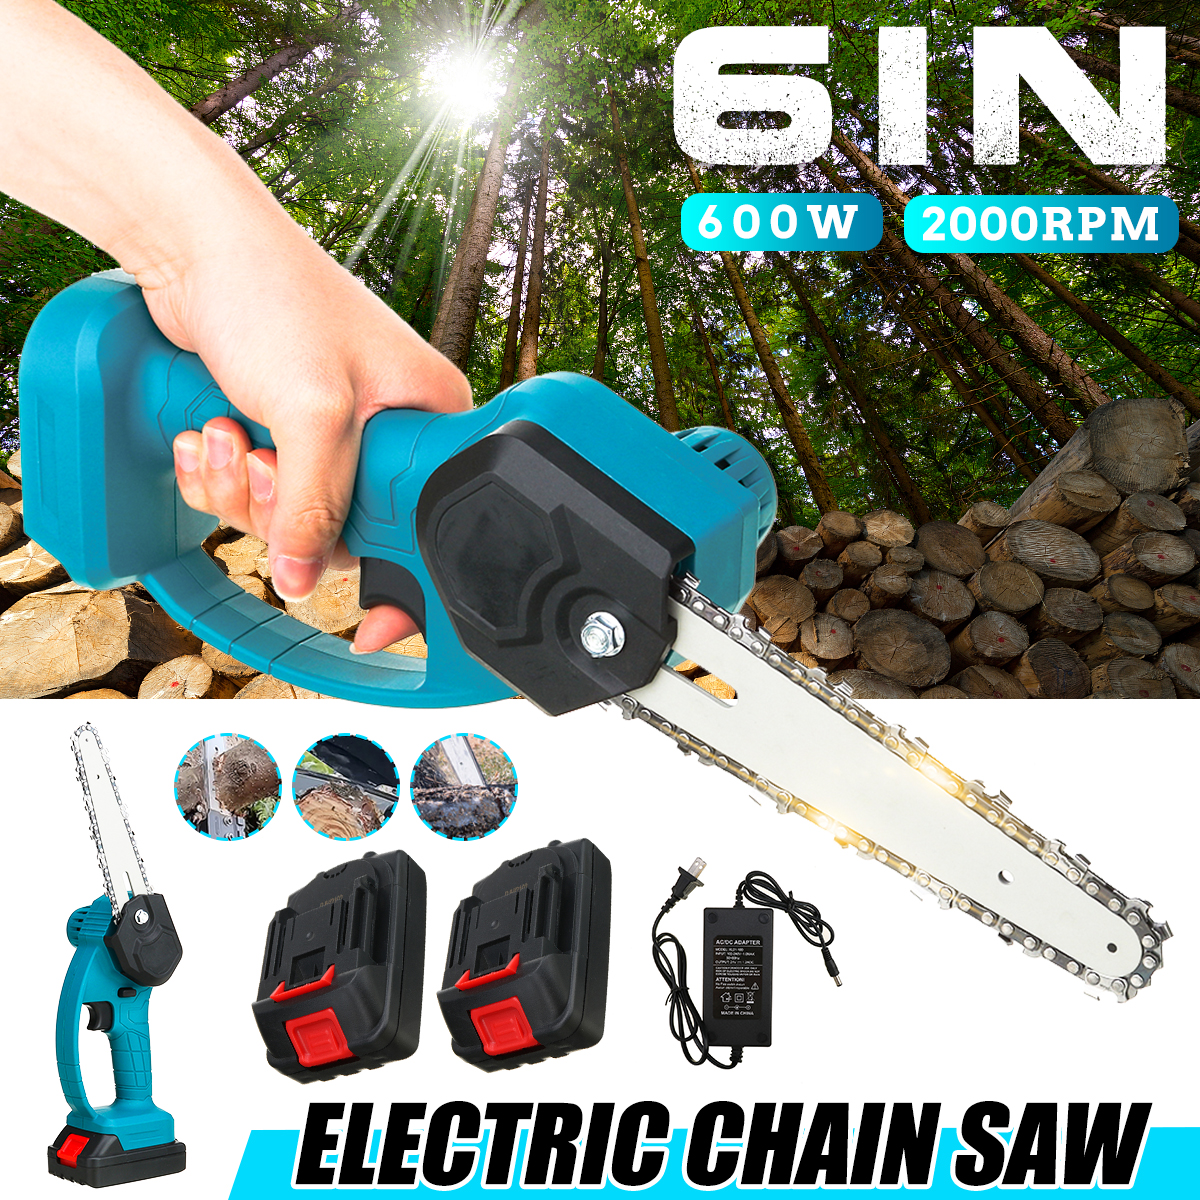 6inch-600W-Electric-Chain-Saw-Rechargeable-Stepless-Speed-Saws-Wood-Cutter-Woodworking-Tool-W-2pcs-B-1827208-2